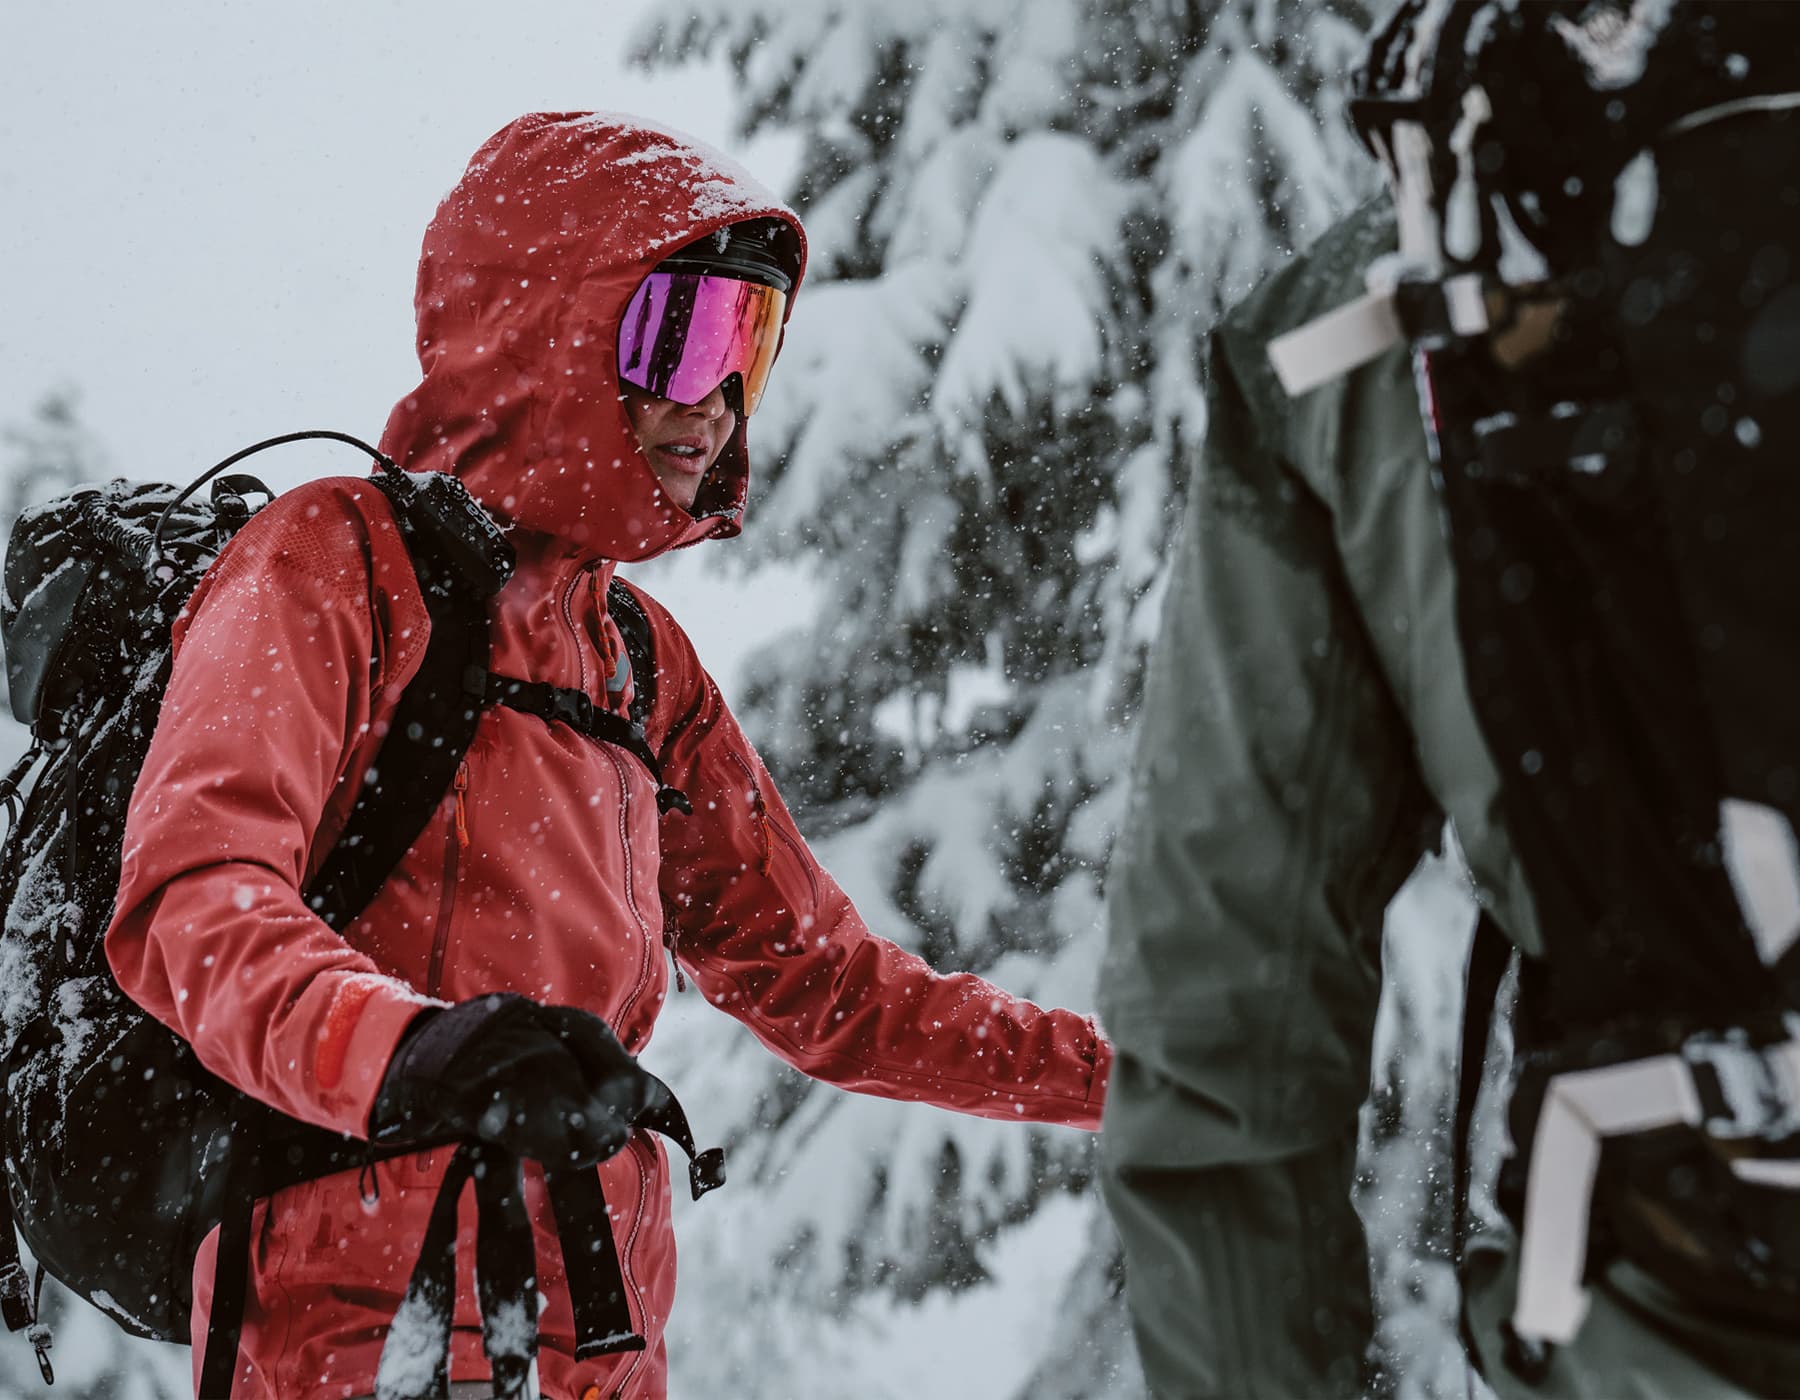 Two skiiers standing and talking to one another in heavy snowfall. One female with a red Orage jacket, backpack and goggles holding ski poles looking in the direction of another skiier with his back to the camera wearing a green Orage jacket and a pack pack